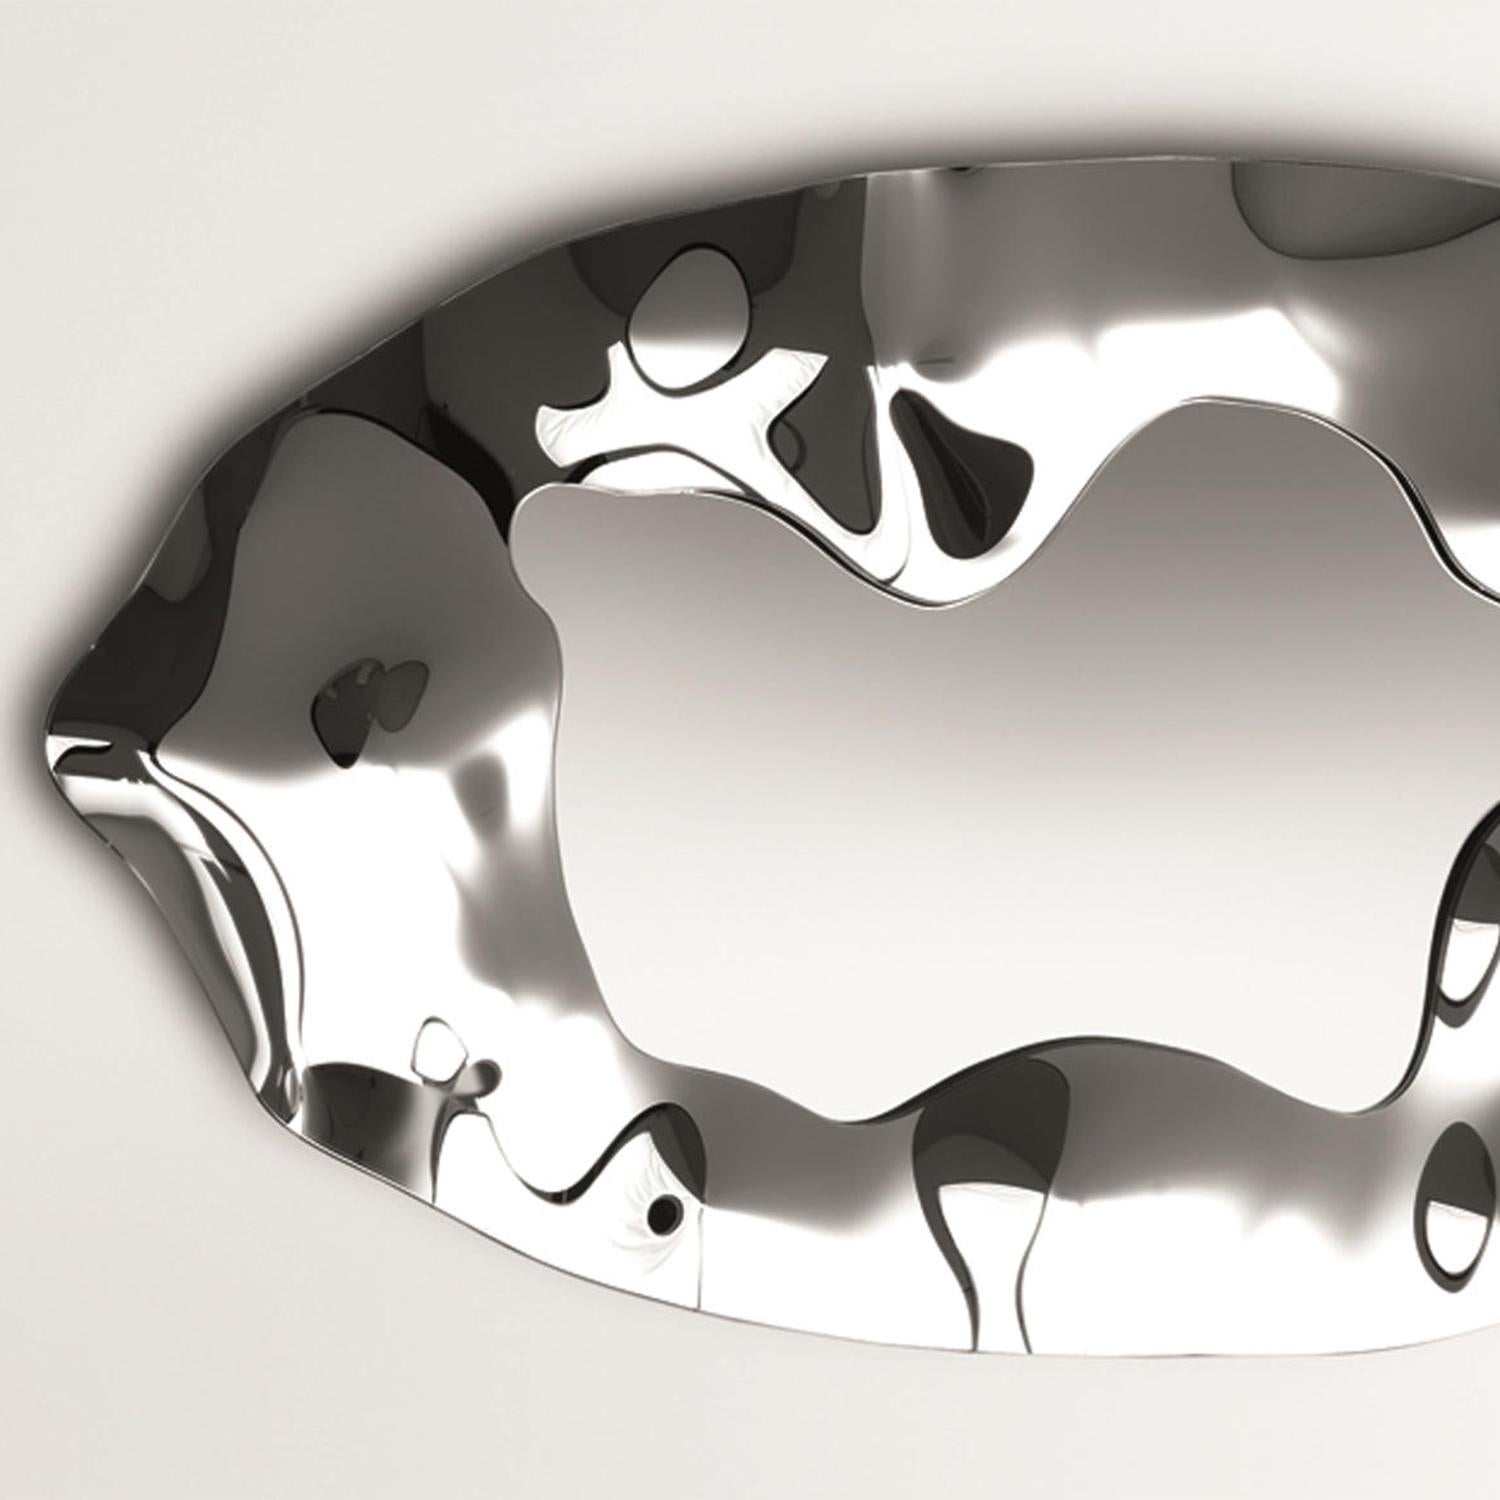 Mirror kinky oval in high temperature fused mirror glass,
6 mm thickness. With fused mirror glass frame and with
silvered metal back.
Also available in kinky square or rectangular mirror.